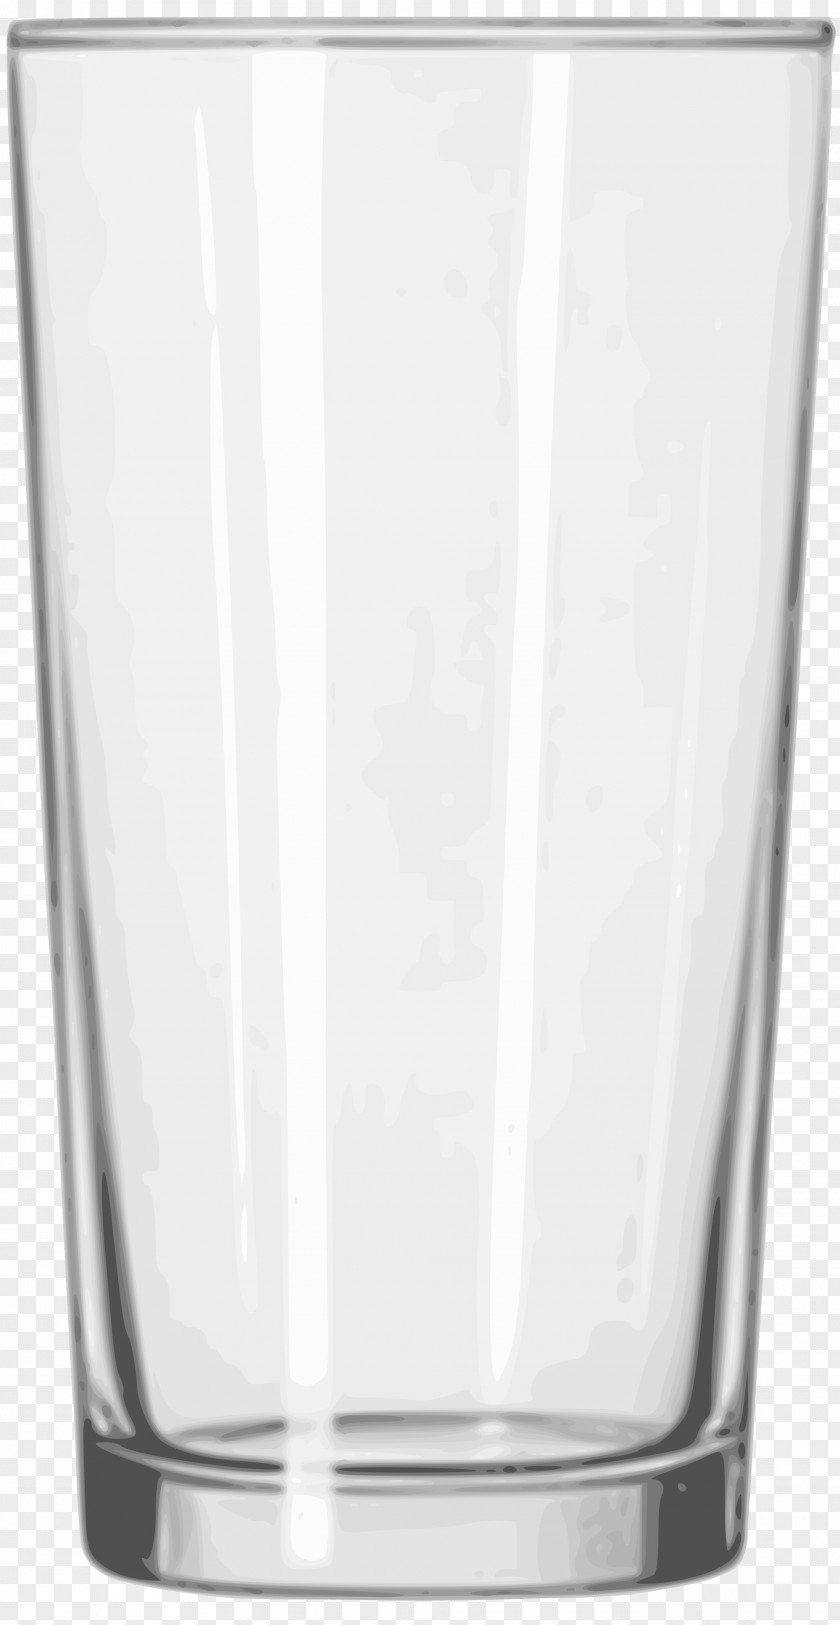 Drinking Glass Image Iced Tea Cup Tumbler PNG